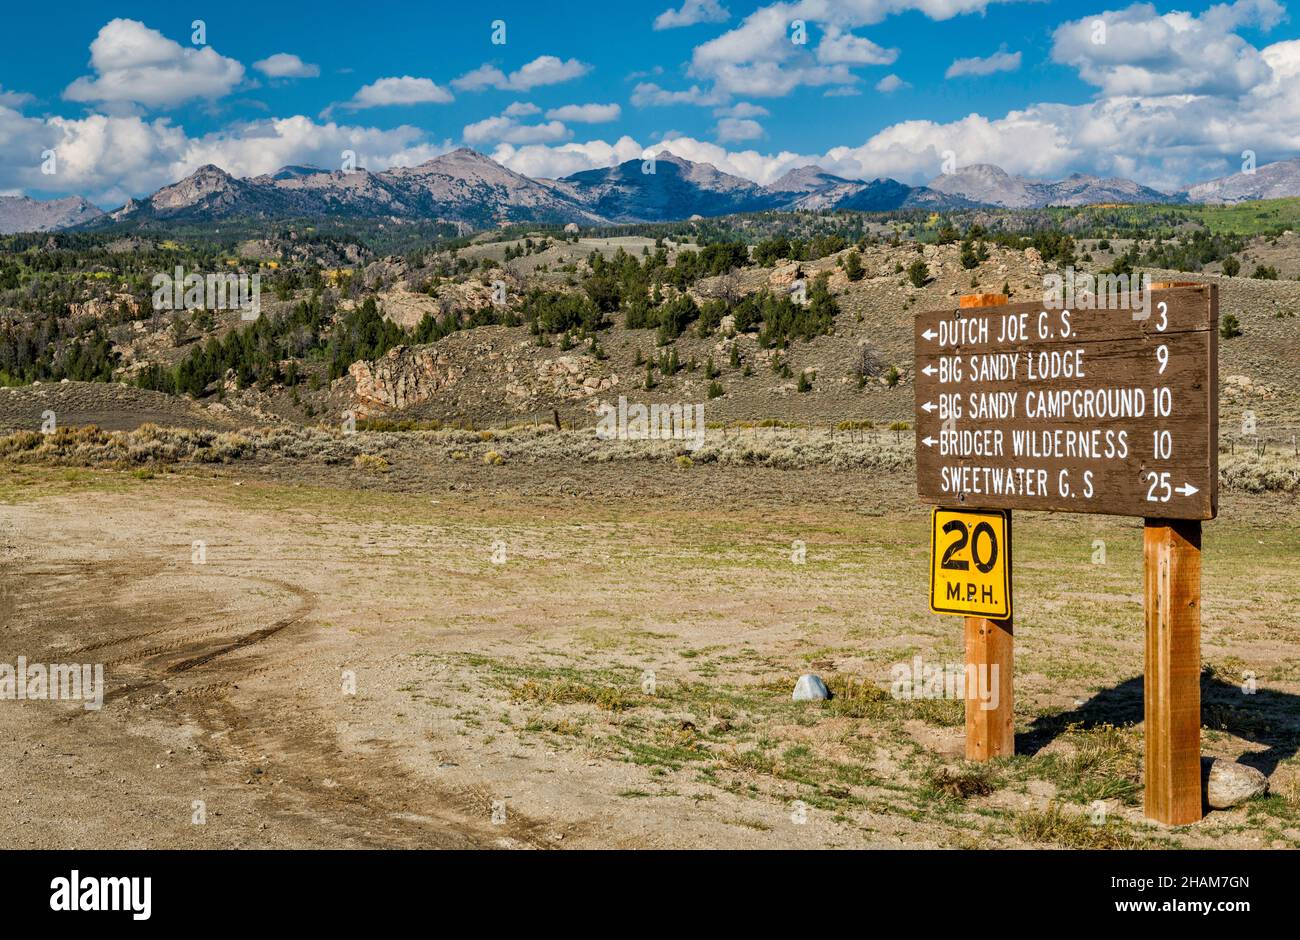 Direction sign, Big Sandy Opening Road (BLMR 4113), at Lander Cutoff Road (CR 132), Wind River Range in distance, Wyoming, USA Stock Photo